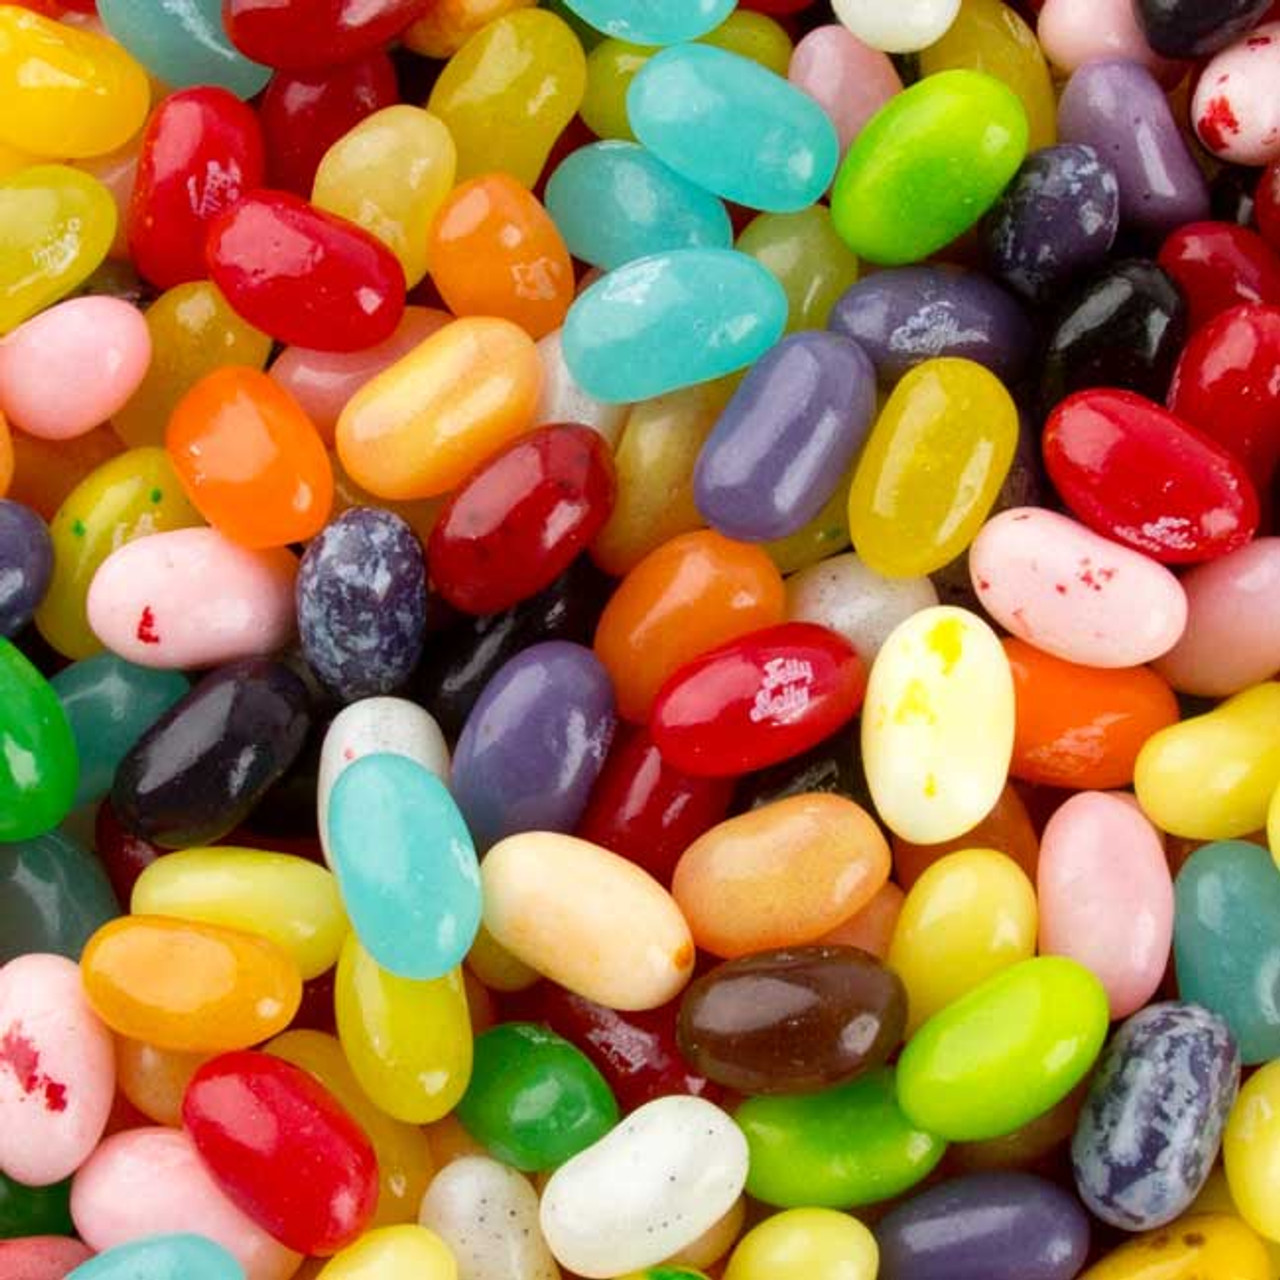 Jelly Belly 49 Flavors Jelly Beans: 10LB Case